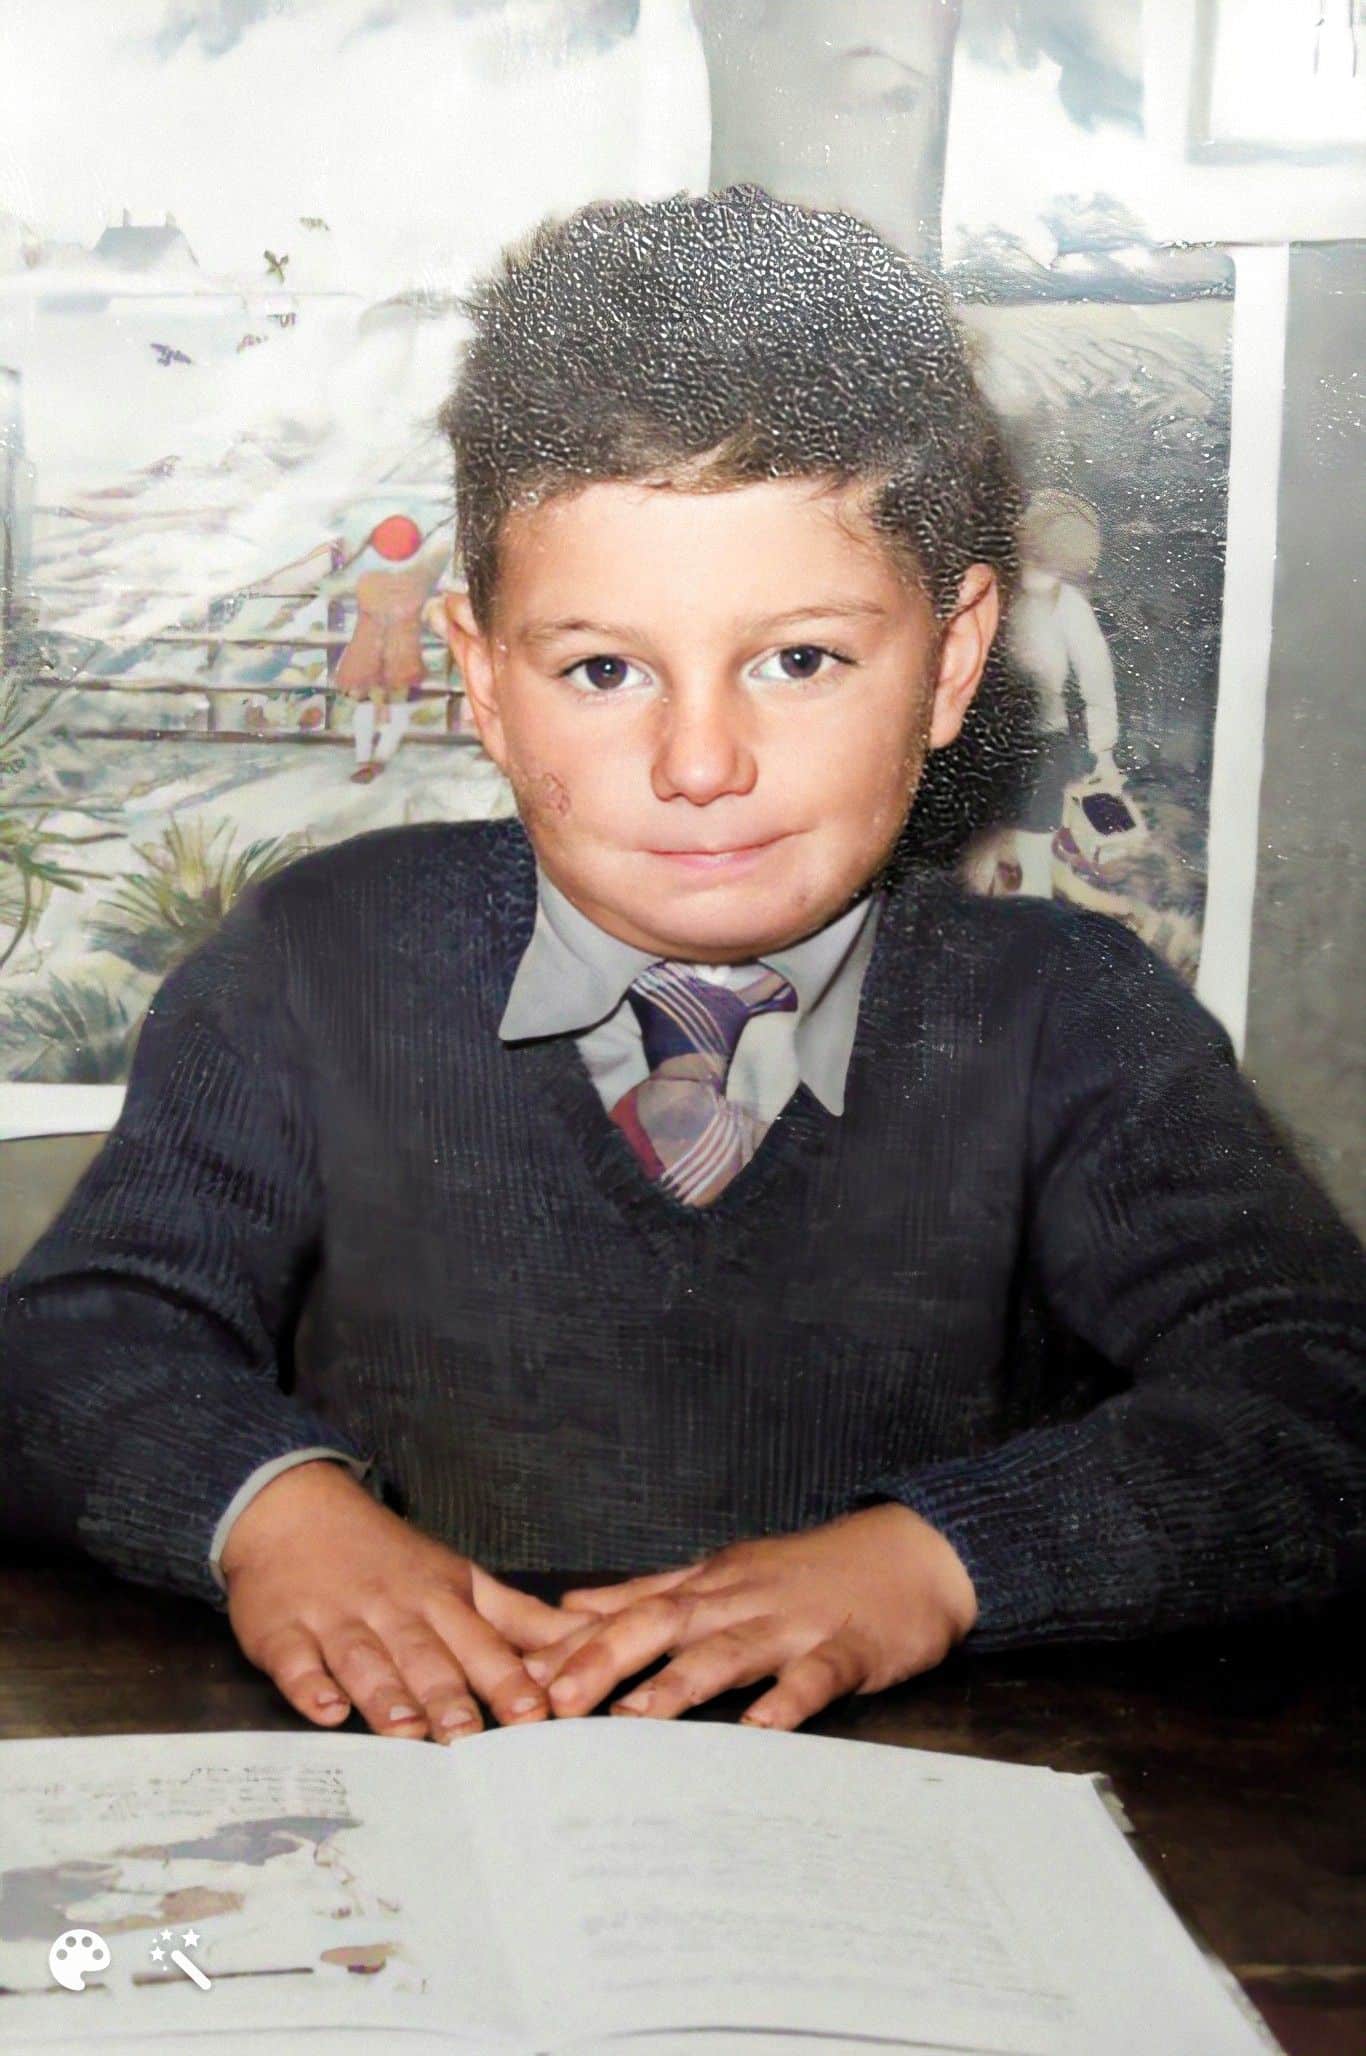 Neil as a child. Photo enhanced and colorized by MyHeritage